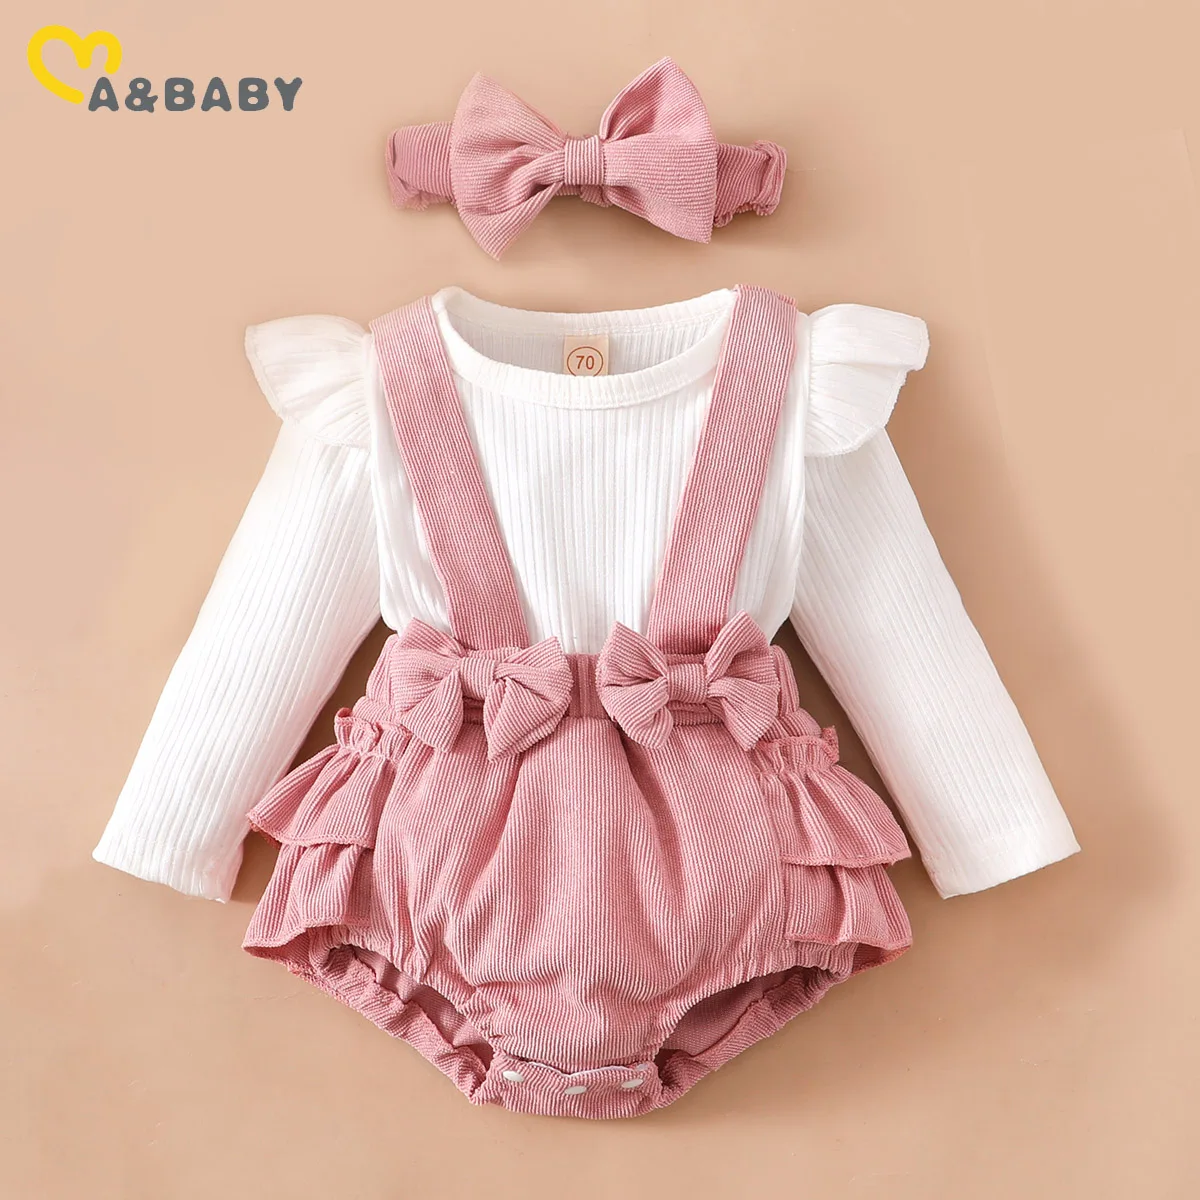 

ma&baby 0-18M Baby Girls Romper Toddler Newborn Infant Fall Spring Jumpsuit Knit Long Sleeve Romper Bow Headband Outfits